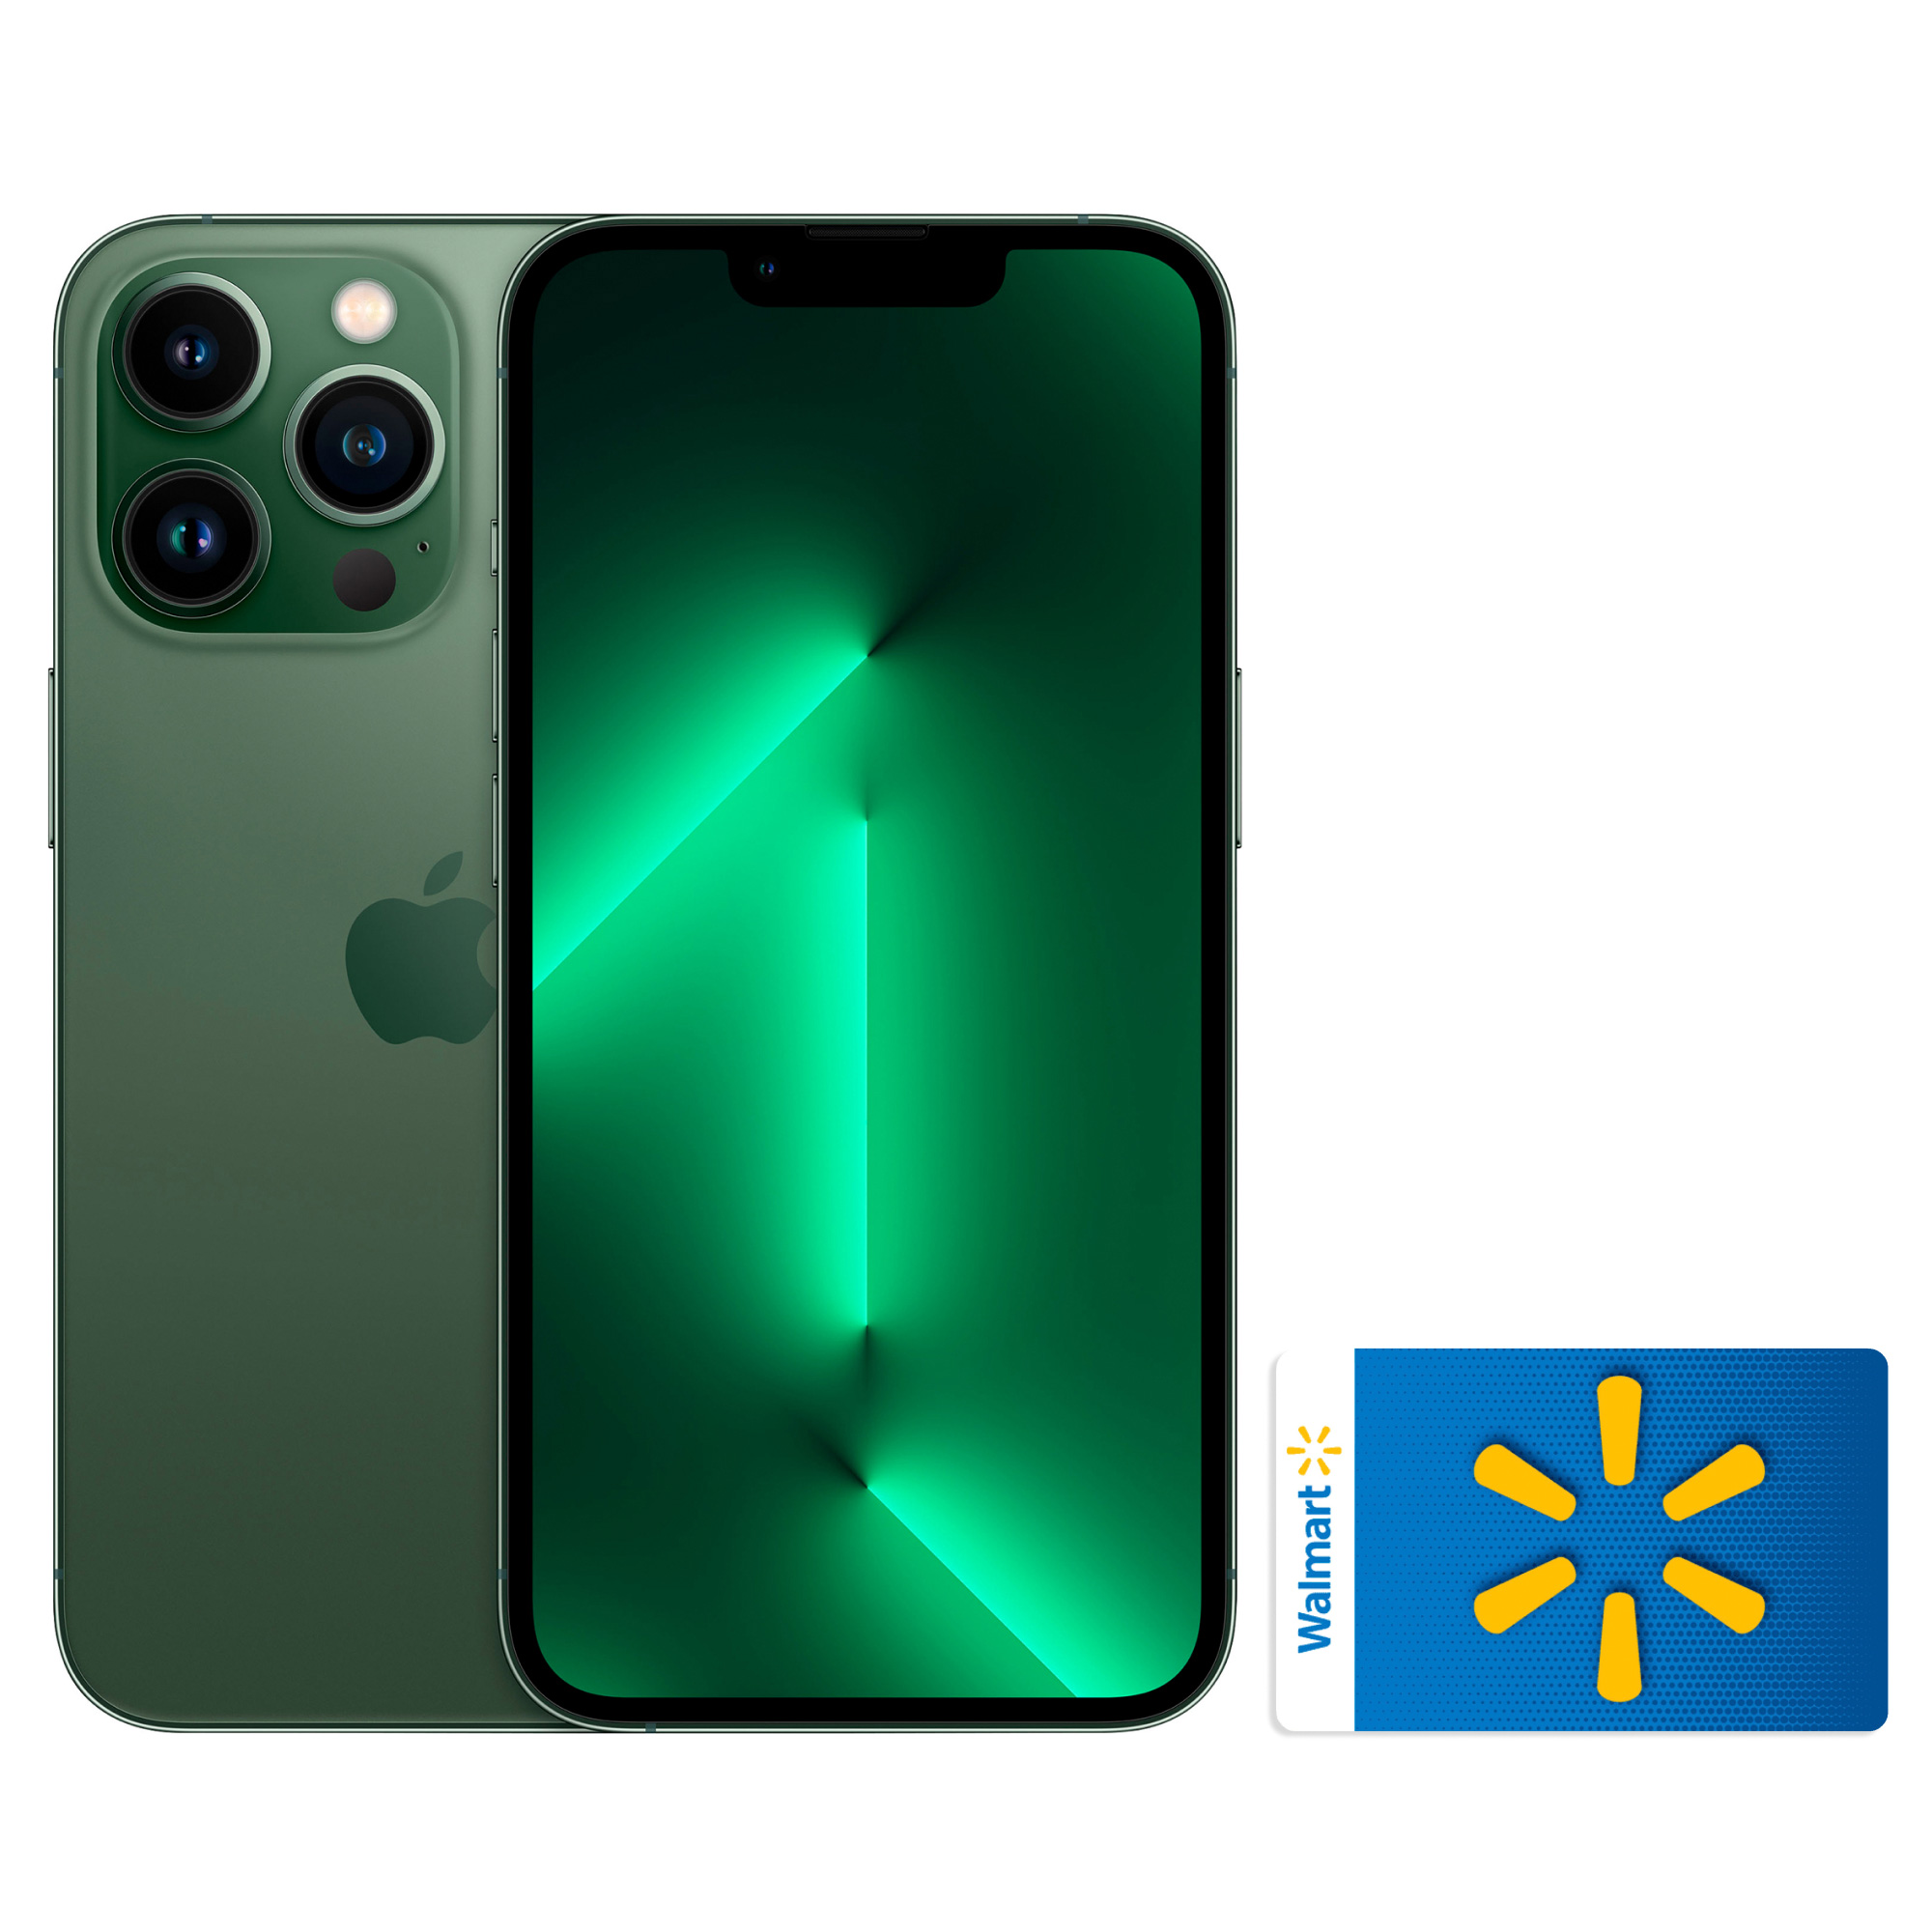 AT&T iPhone 13 Pro 128GB Alpine Green - image 1 of 8